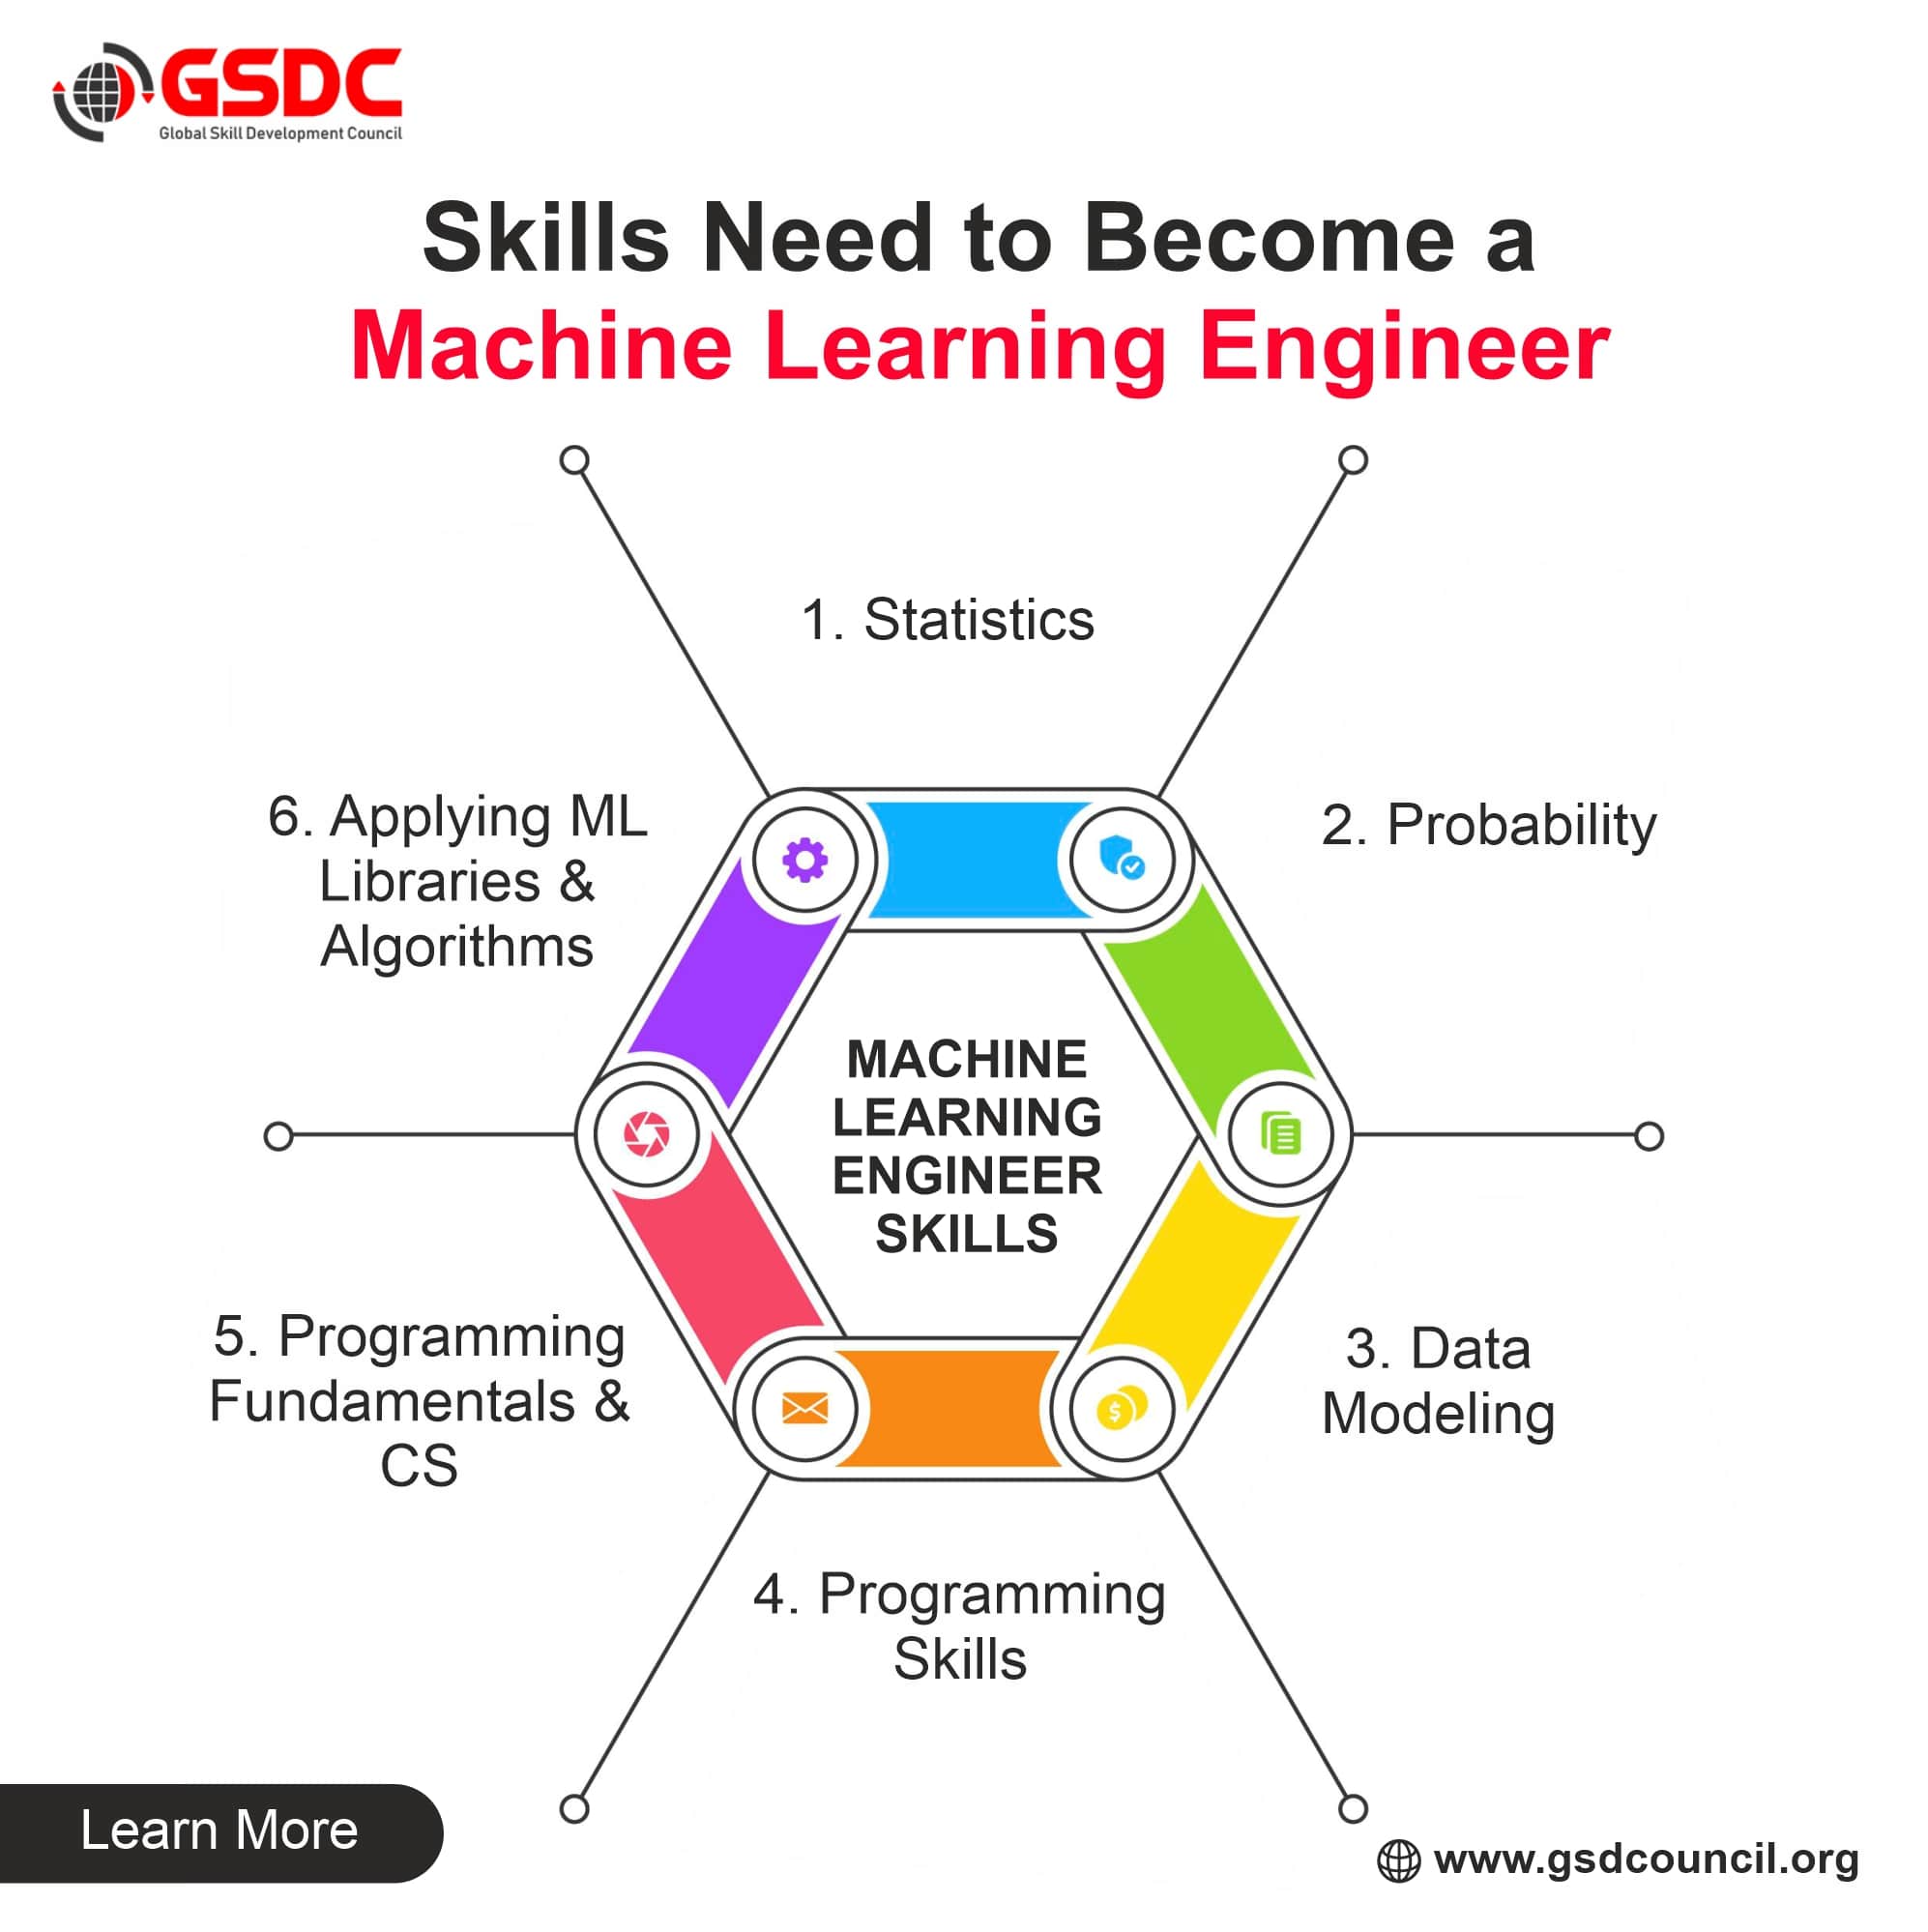 Learn Skills from ML Certification to become an ML expert